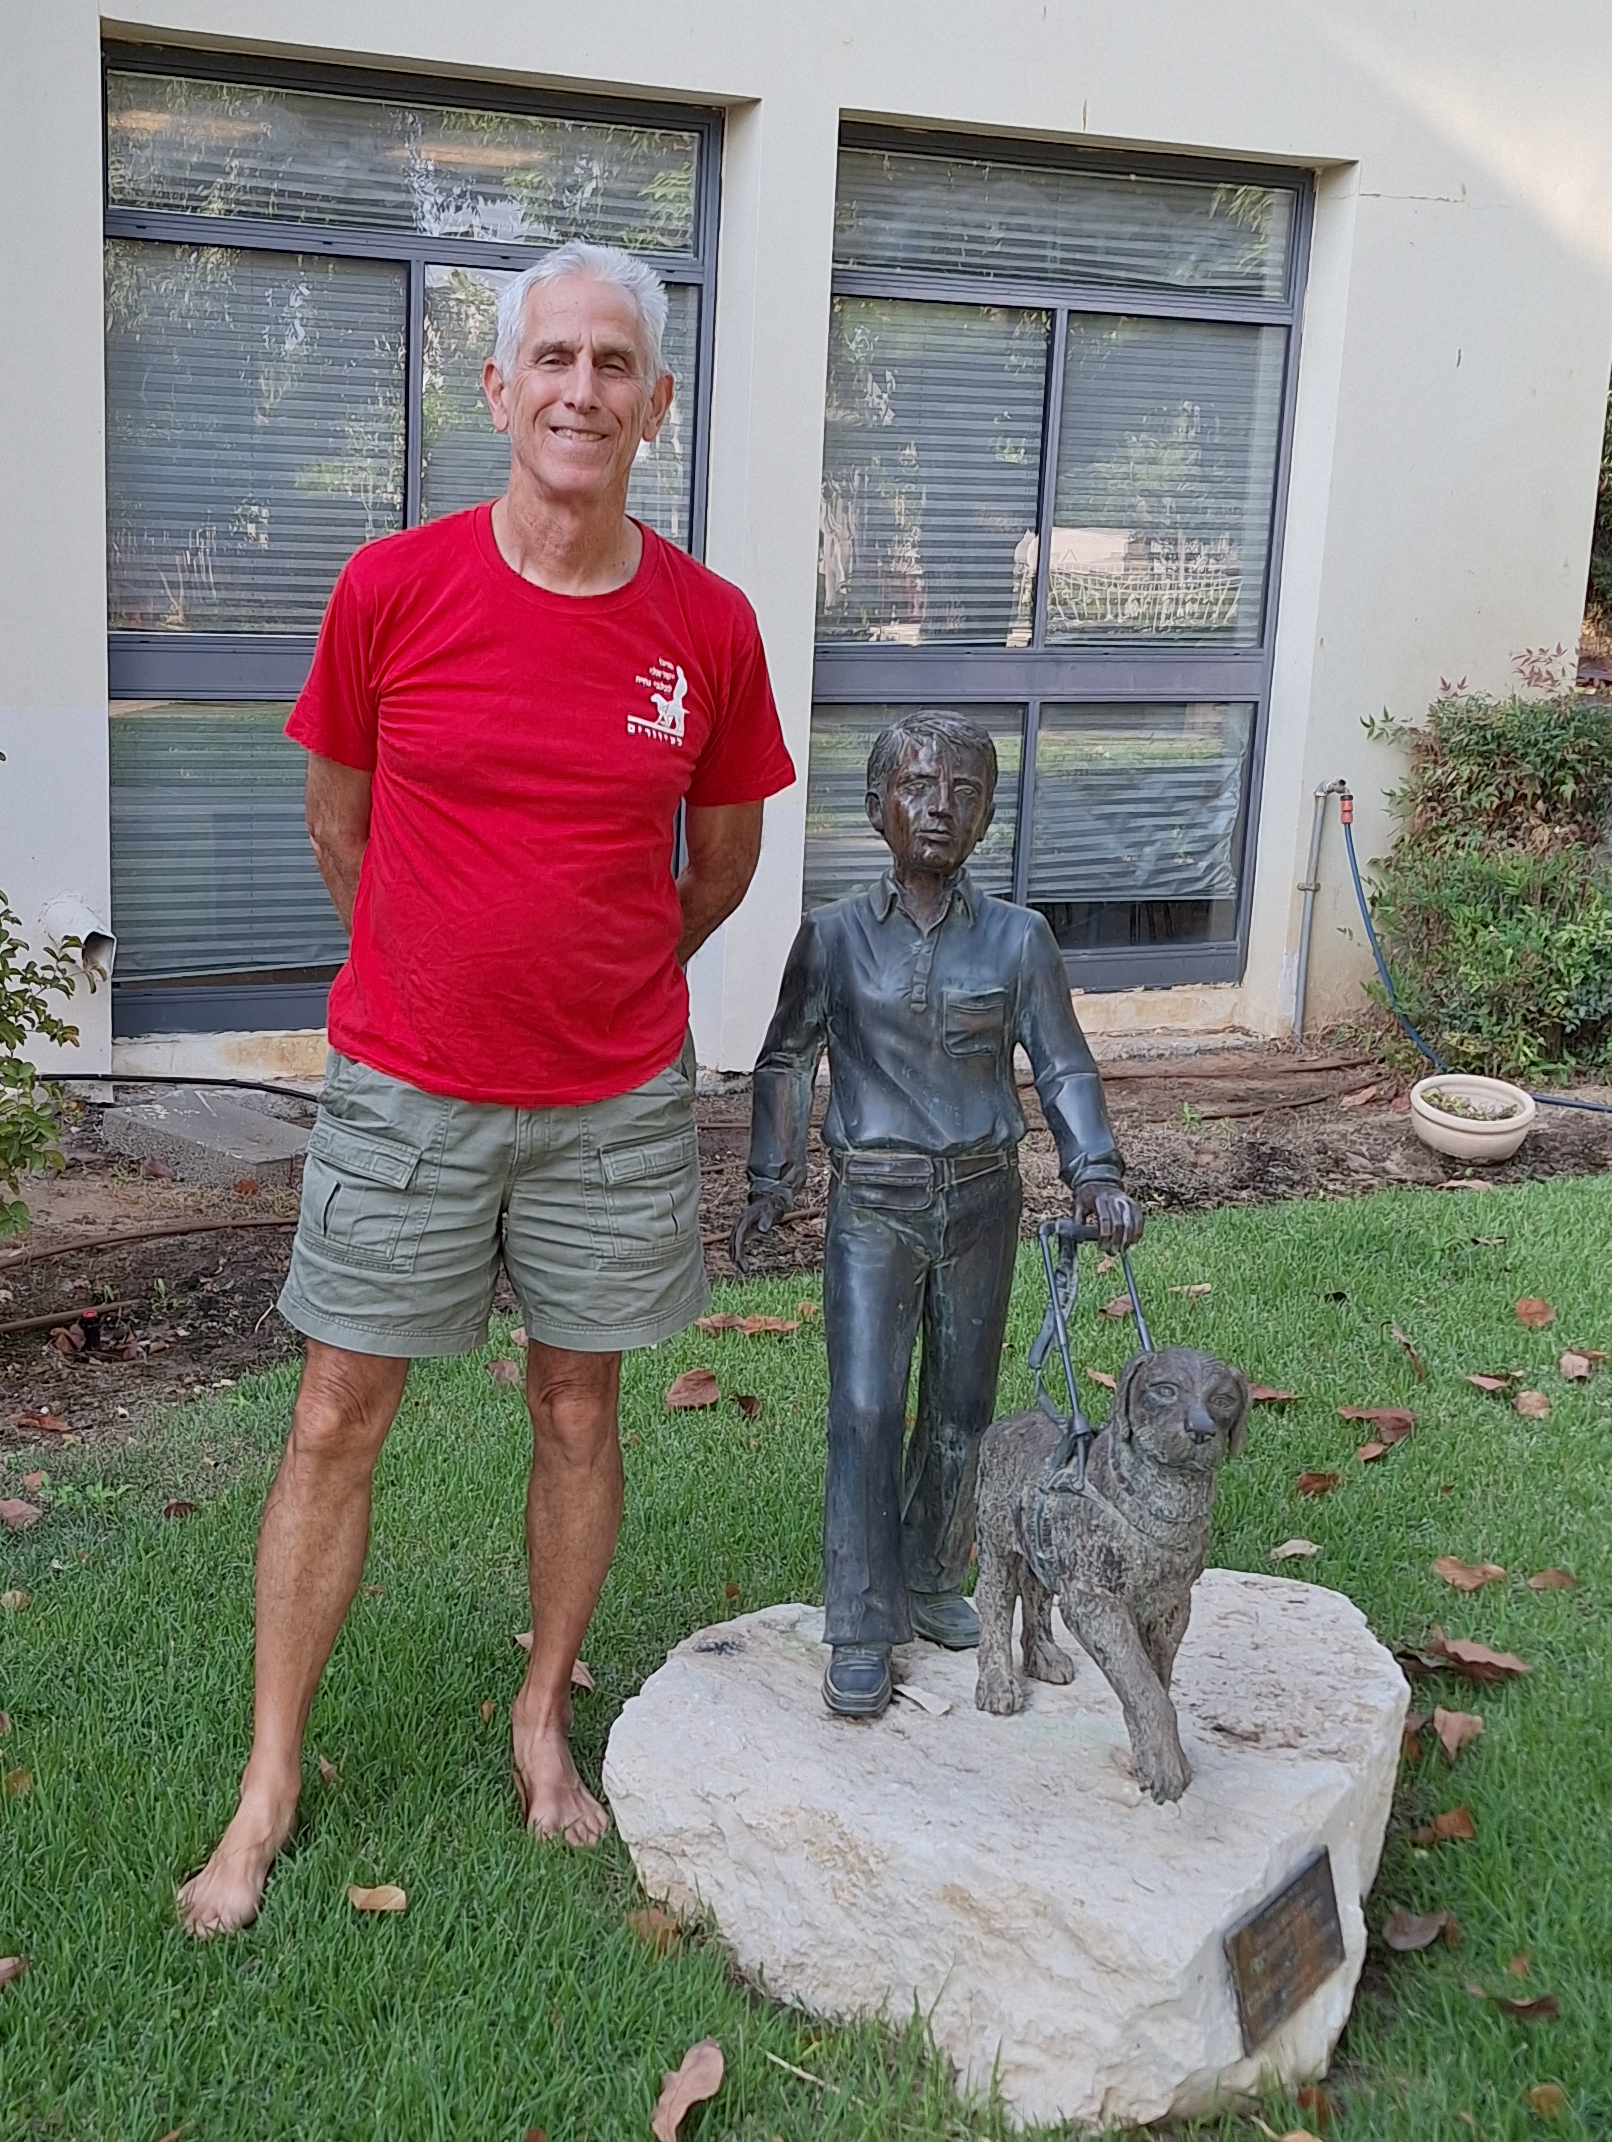 Ephraim is pictured posing next to a statue of a guide dog and young boy located at our Beit Oved campus.